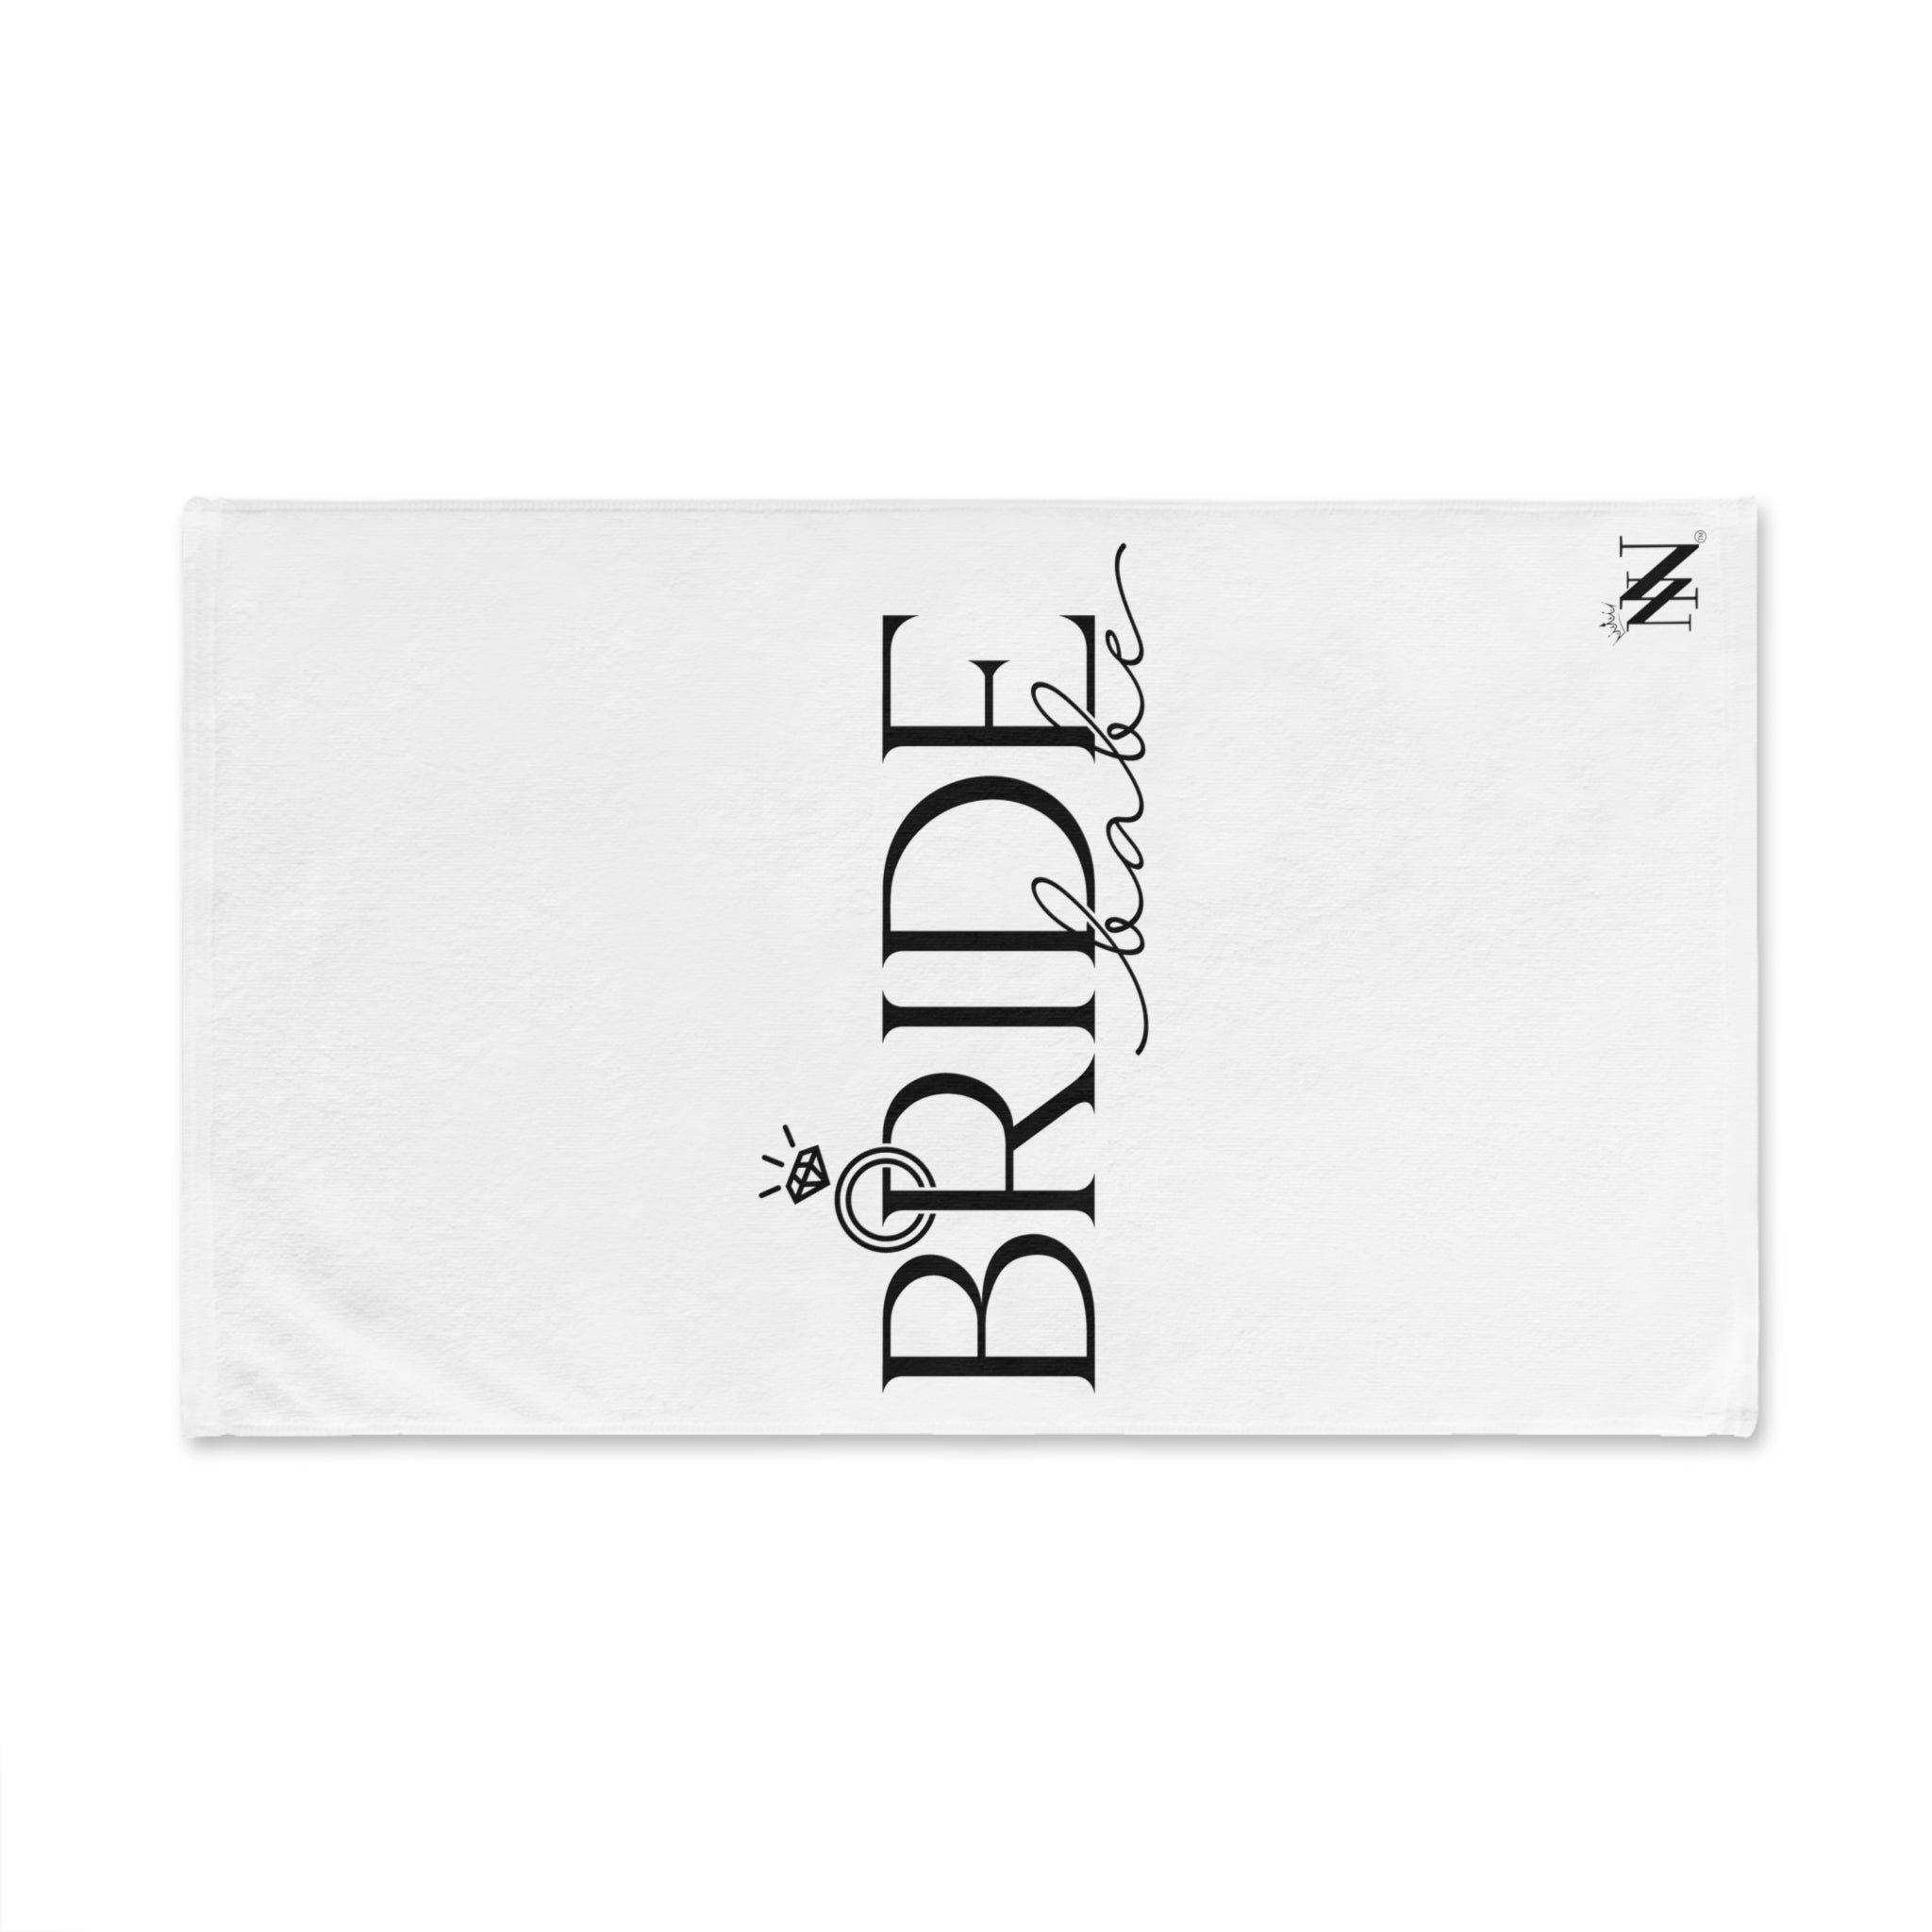 Bride Babe Bridal White | Funny Gifts for Men - Gifts for Him - Birthday Gifts for Men, Him, Her, Husband, Boyfriend, Girlfriend, New Couple Gifts, Fathers & Valentines Day Gifts, Christmas Gifts NECTAR NAPKINS